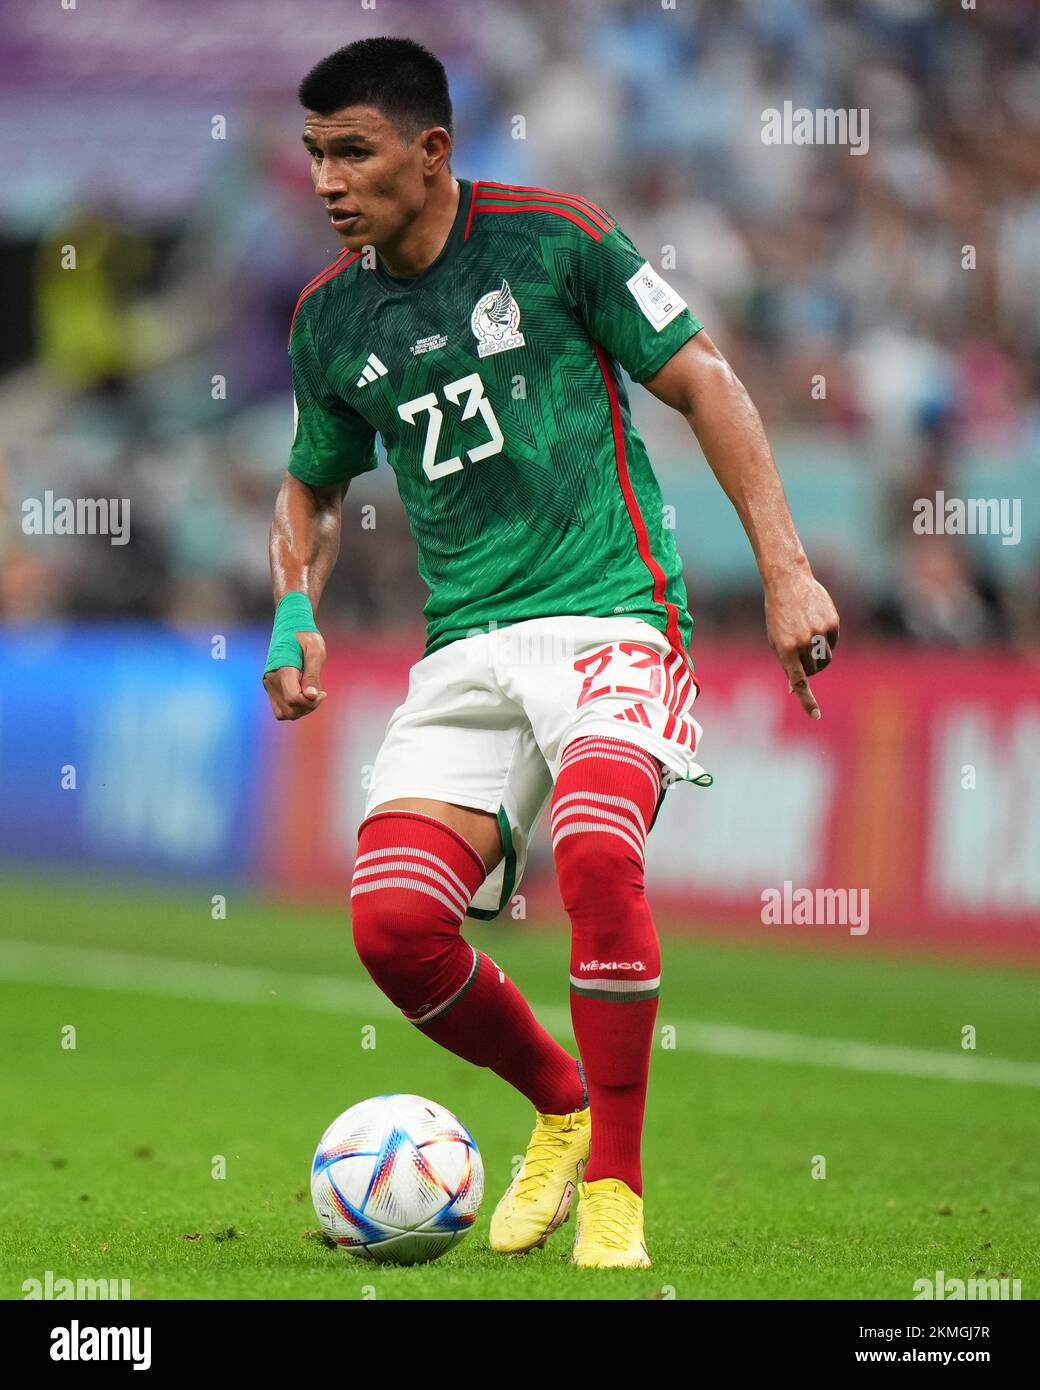 Jesus Gallardo of Mexico during the FIFA World Cup Qatar 2022 match, Group C, between Argentina and Mexico played at Lusail Stadium on Nov 26, 2022 in Lusail, Qatar